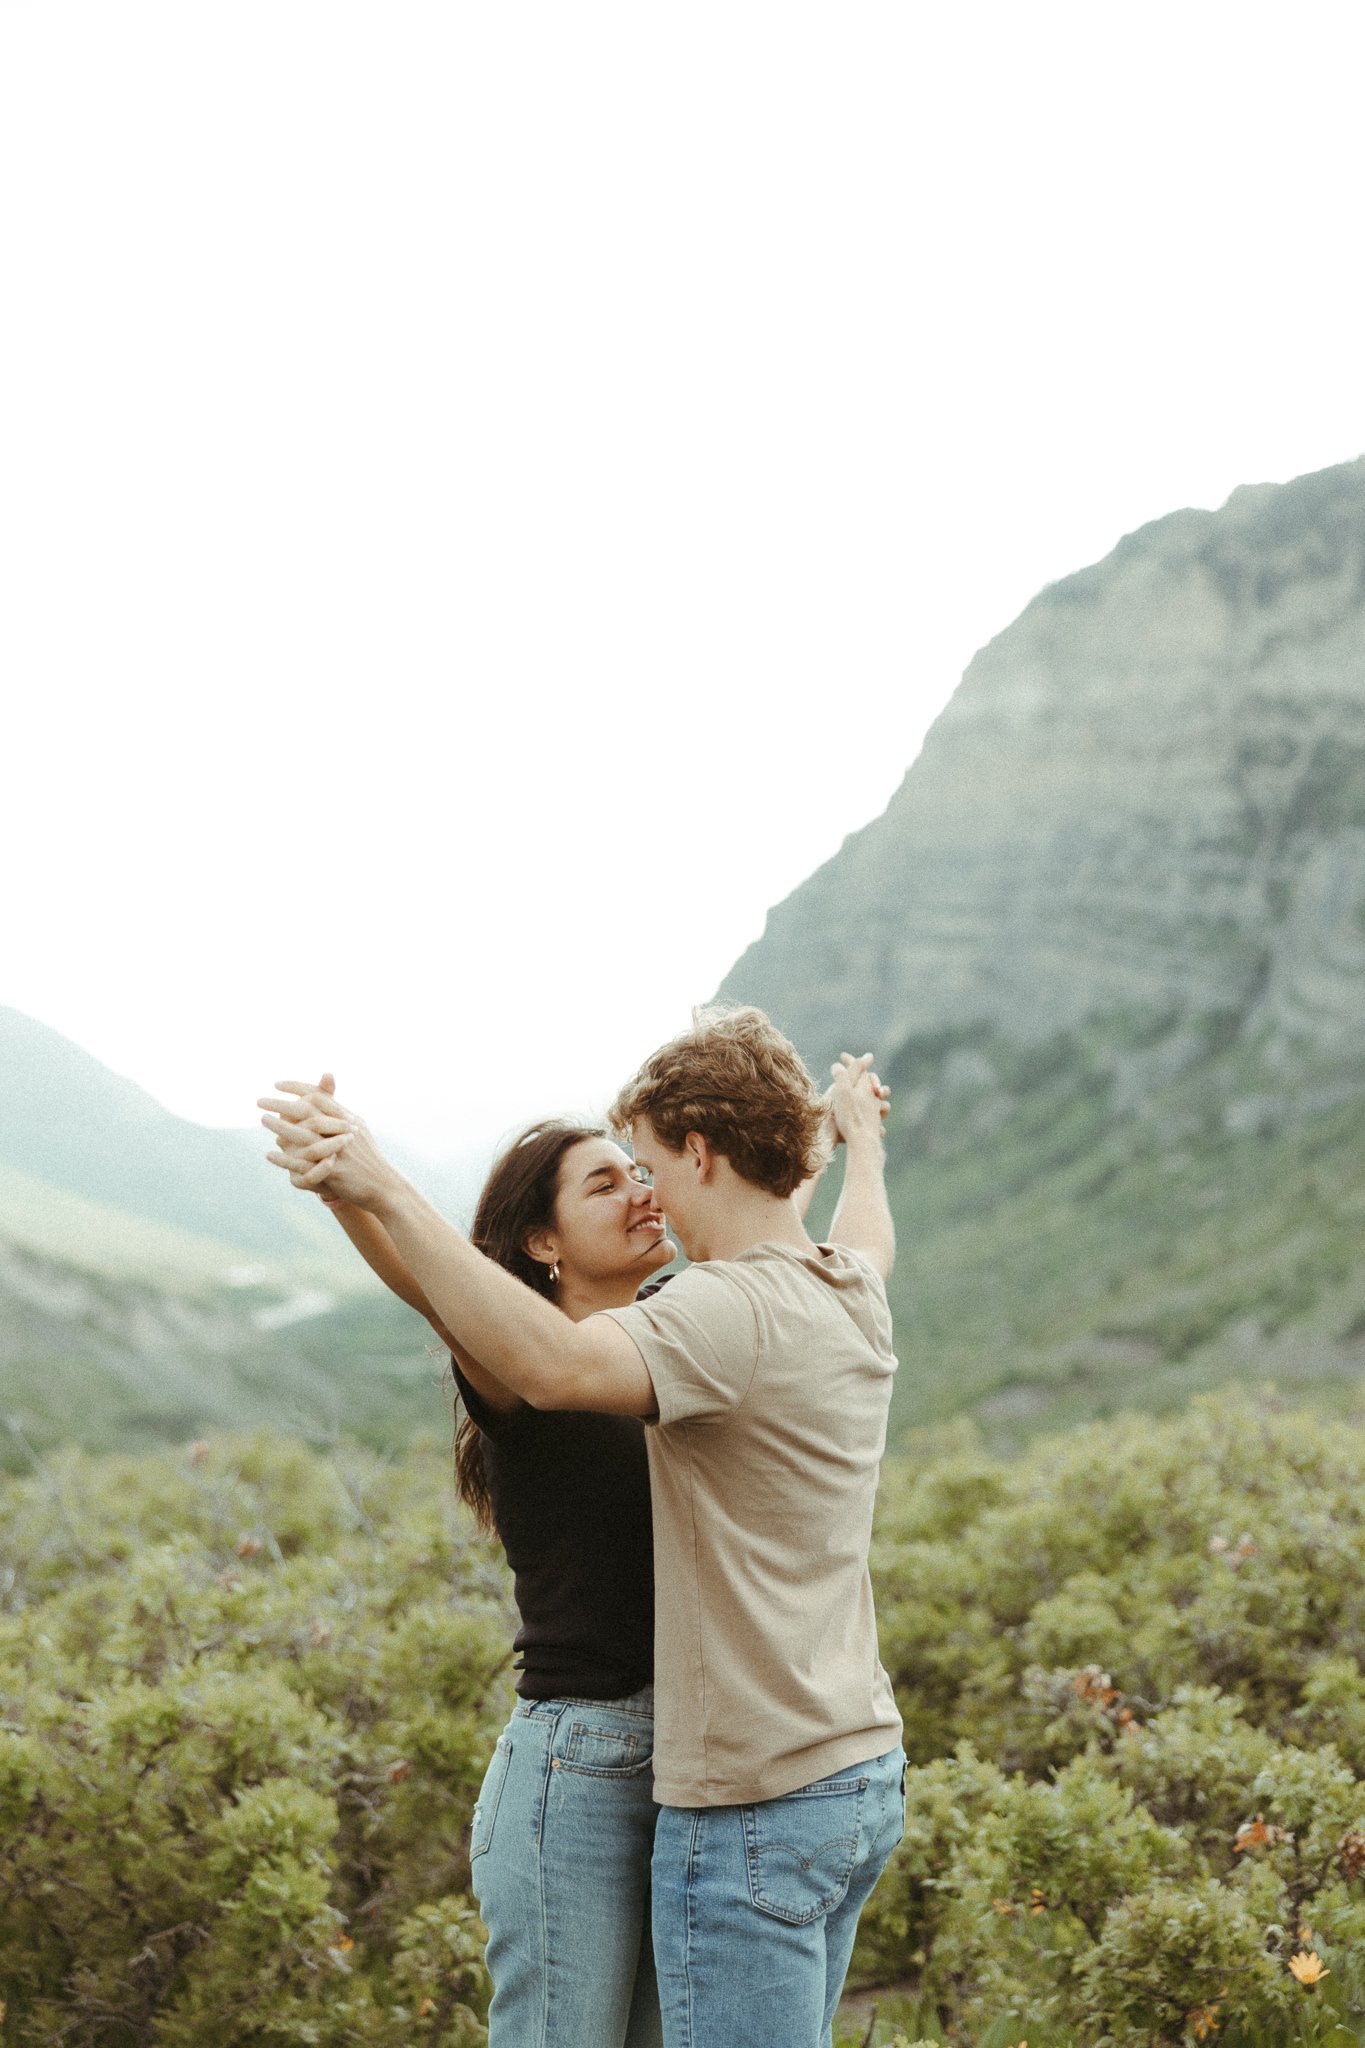 Spring-Provo-Canyon-Wildflowers-Engagement-Session-48